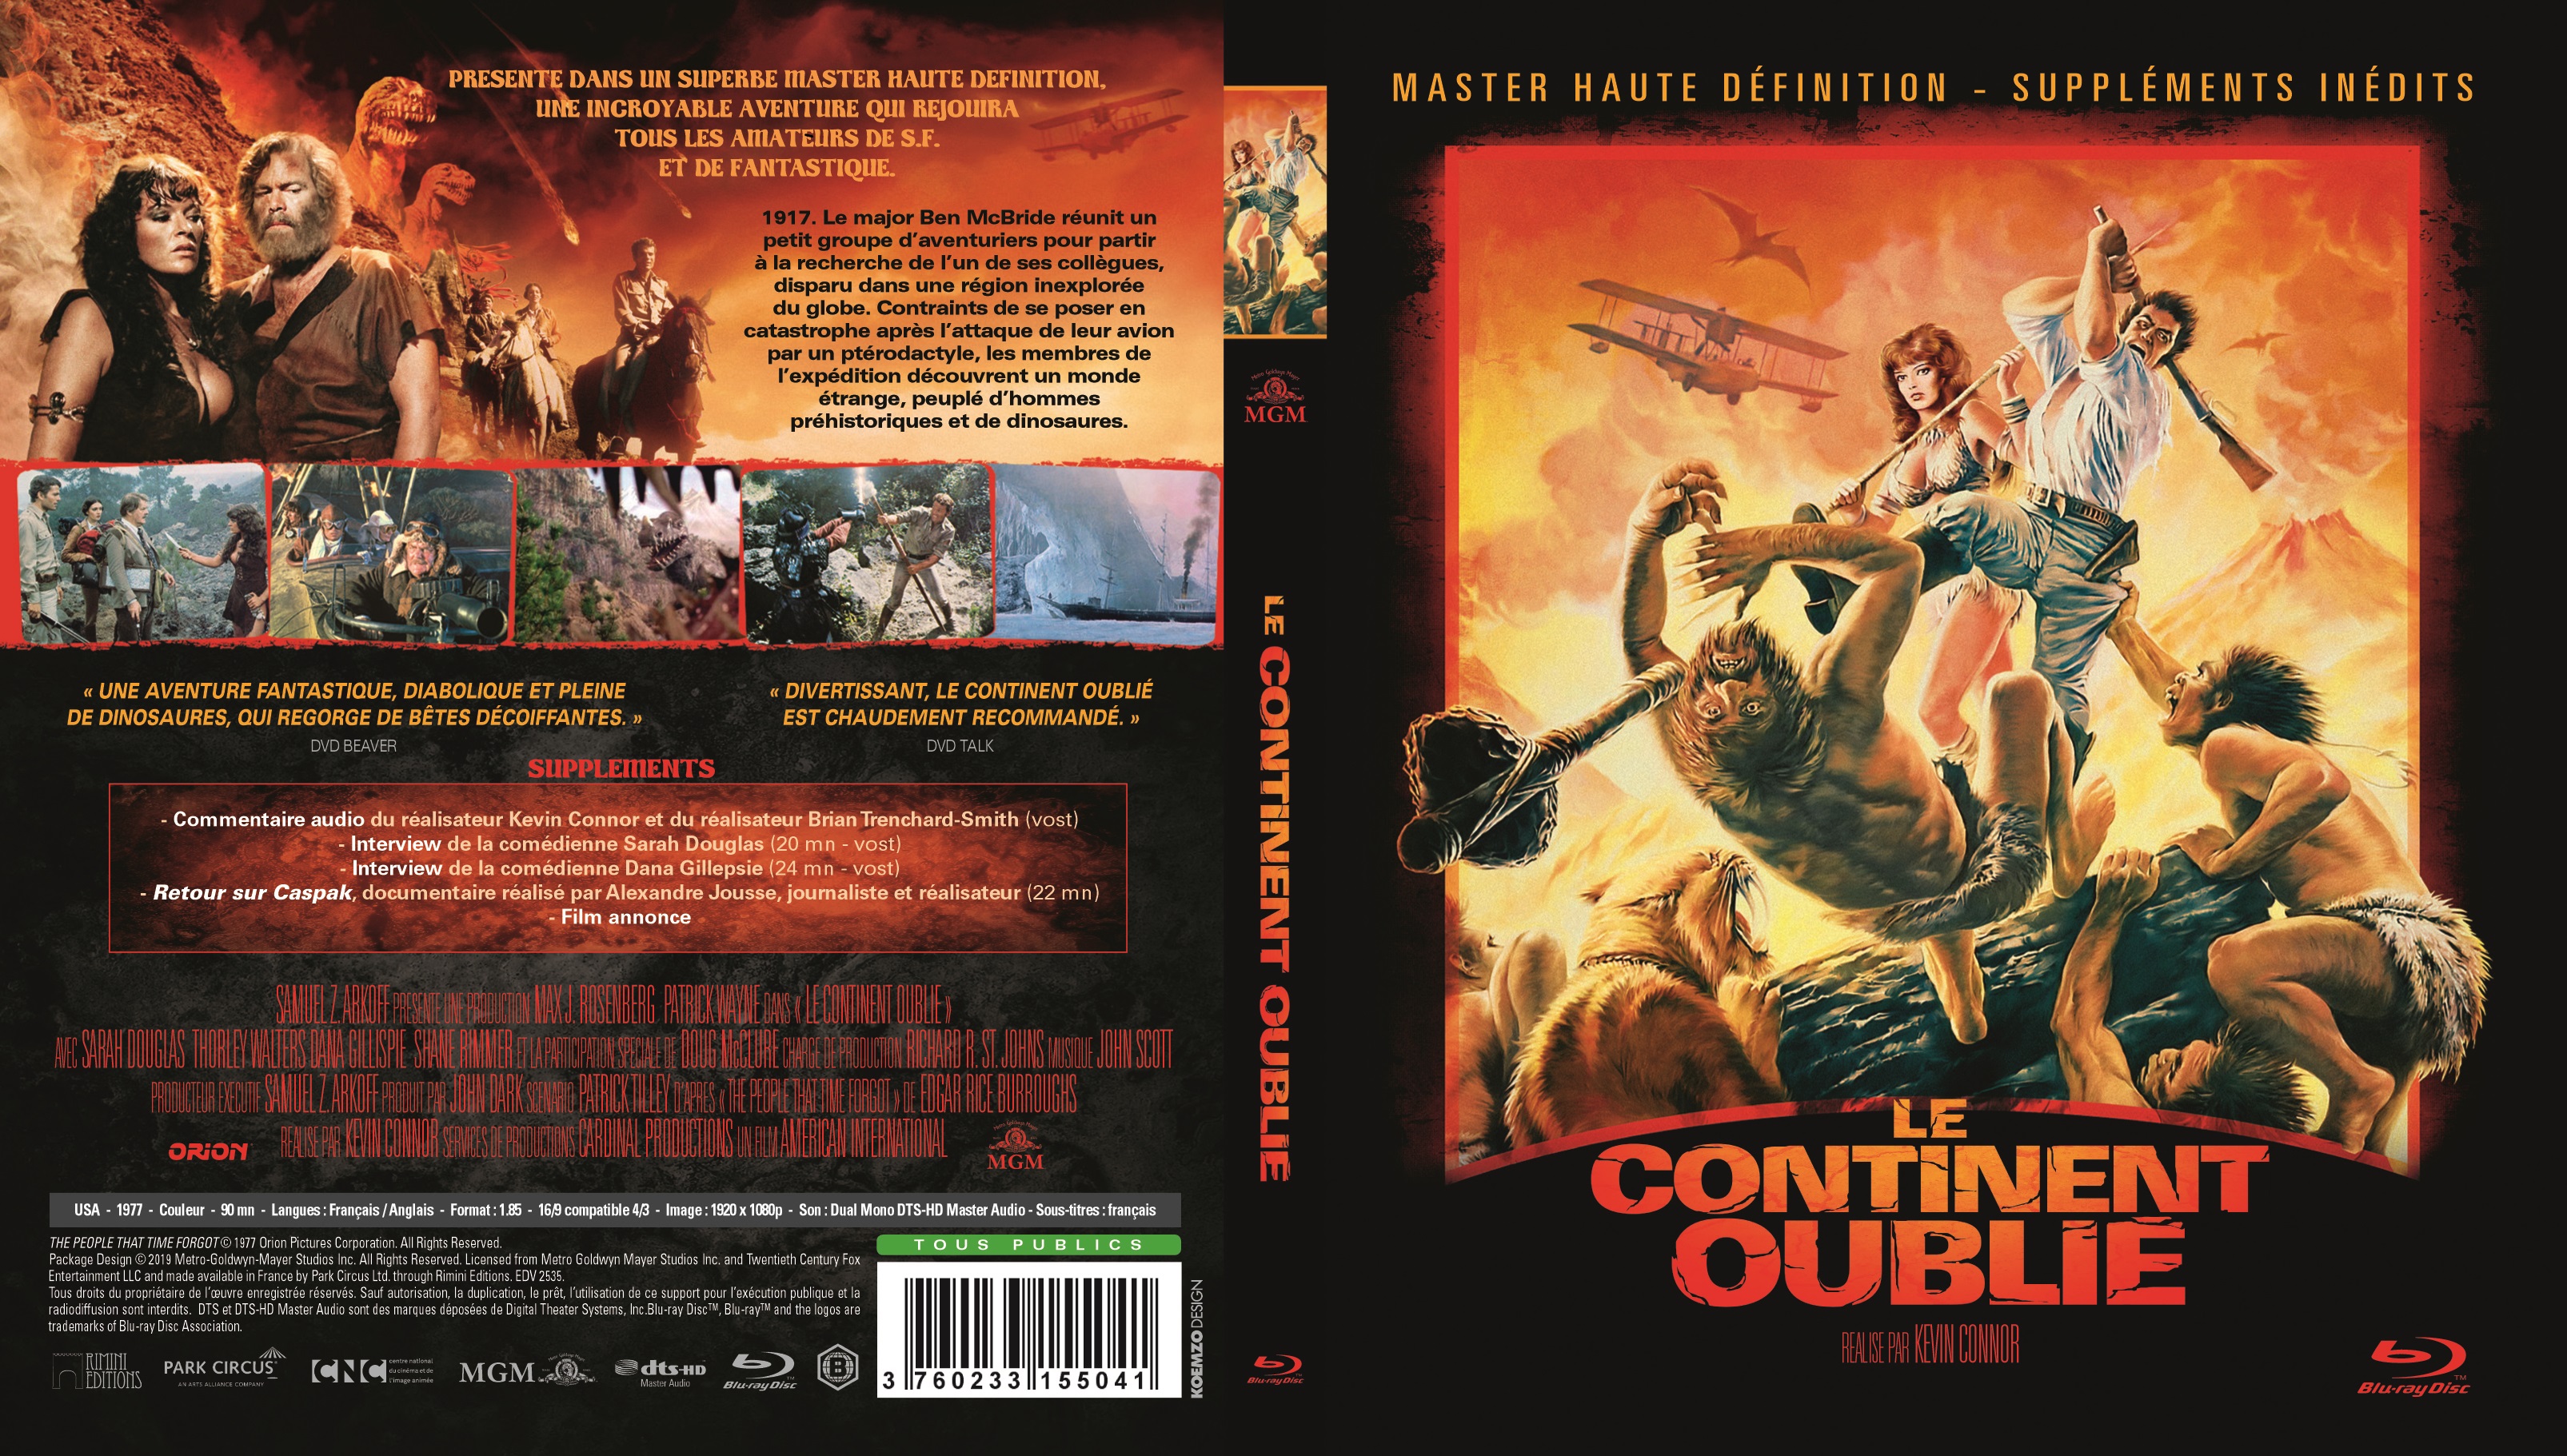 Jaquette DVD Le continent oubli (BLU-RAY)